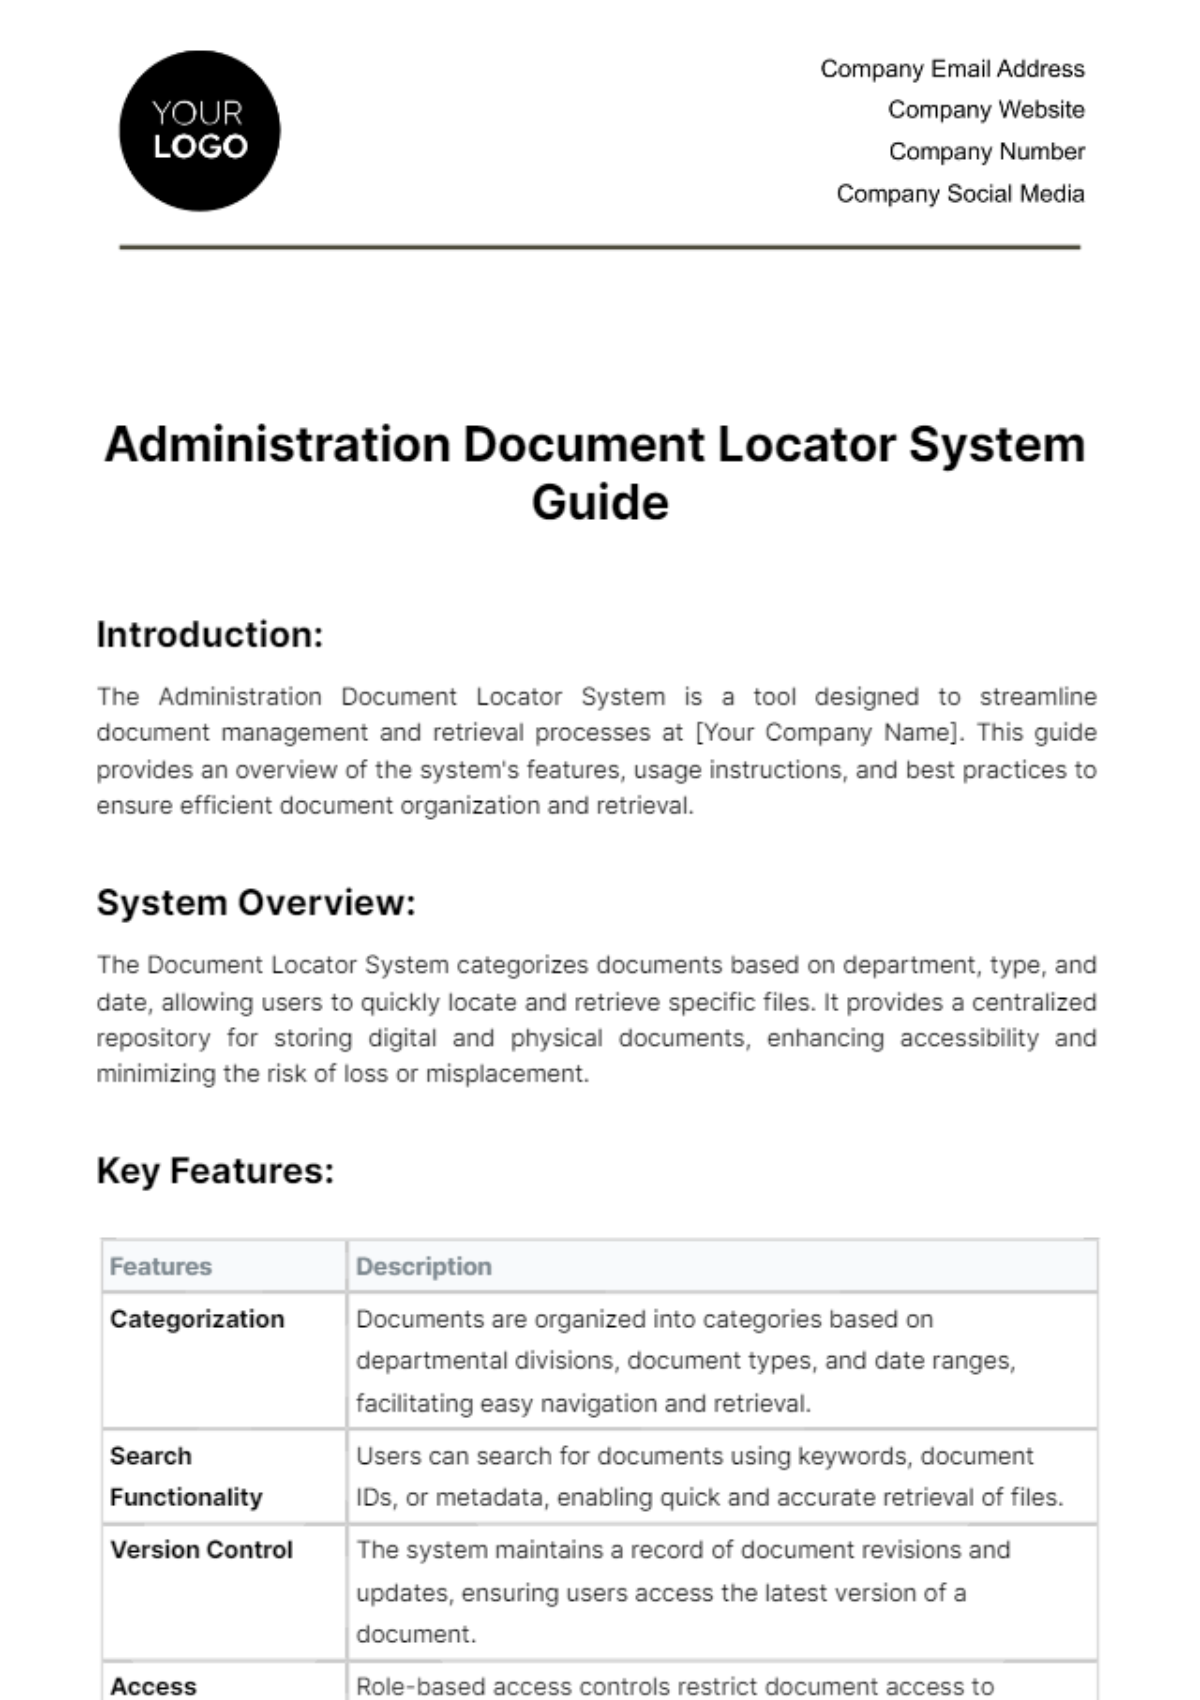 Free Administration Document Locator System Guide Template